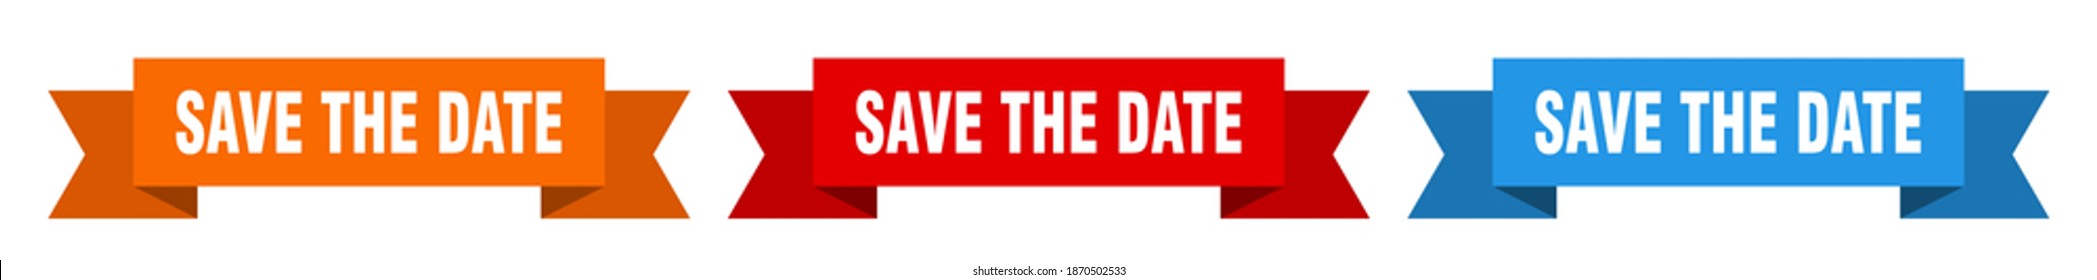 Save date banner Images, Stock Photos & Vectors | Shutterstock